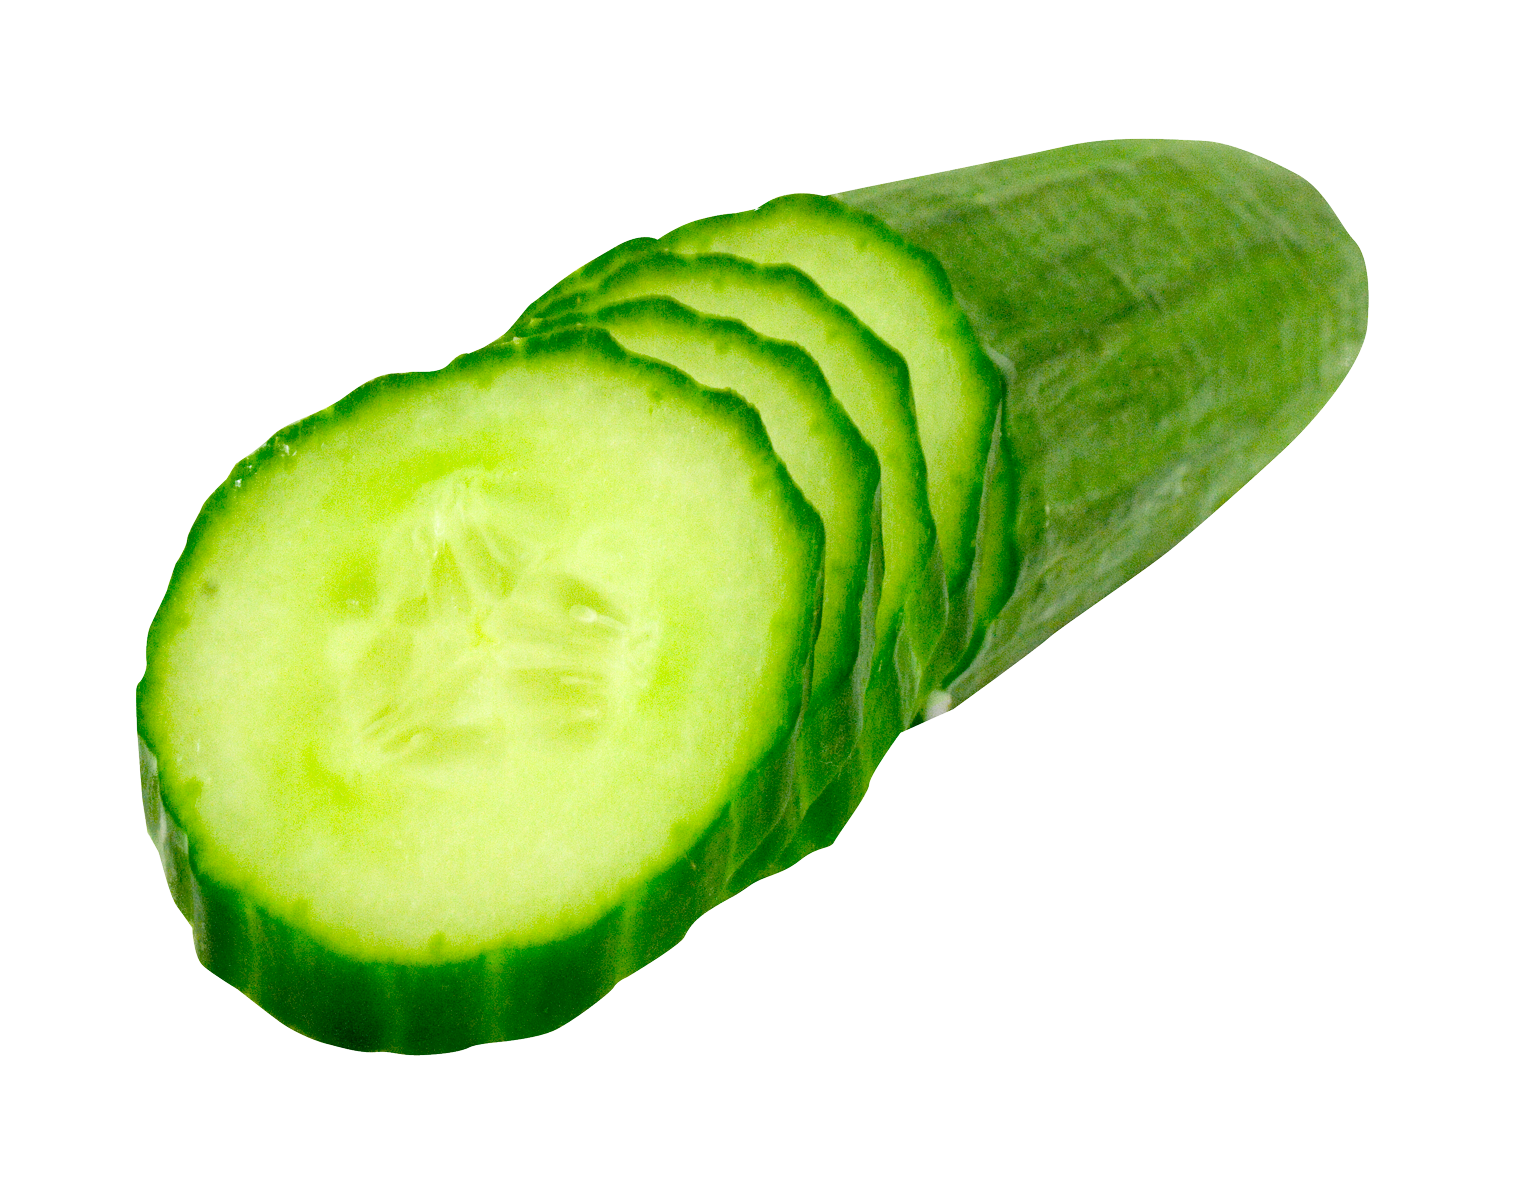 Cucumber Sliced Png Image - Cucumber, Transparent background PNG HD thumbnail